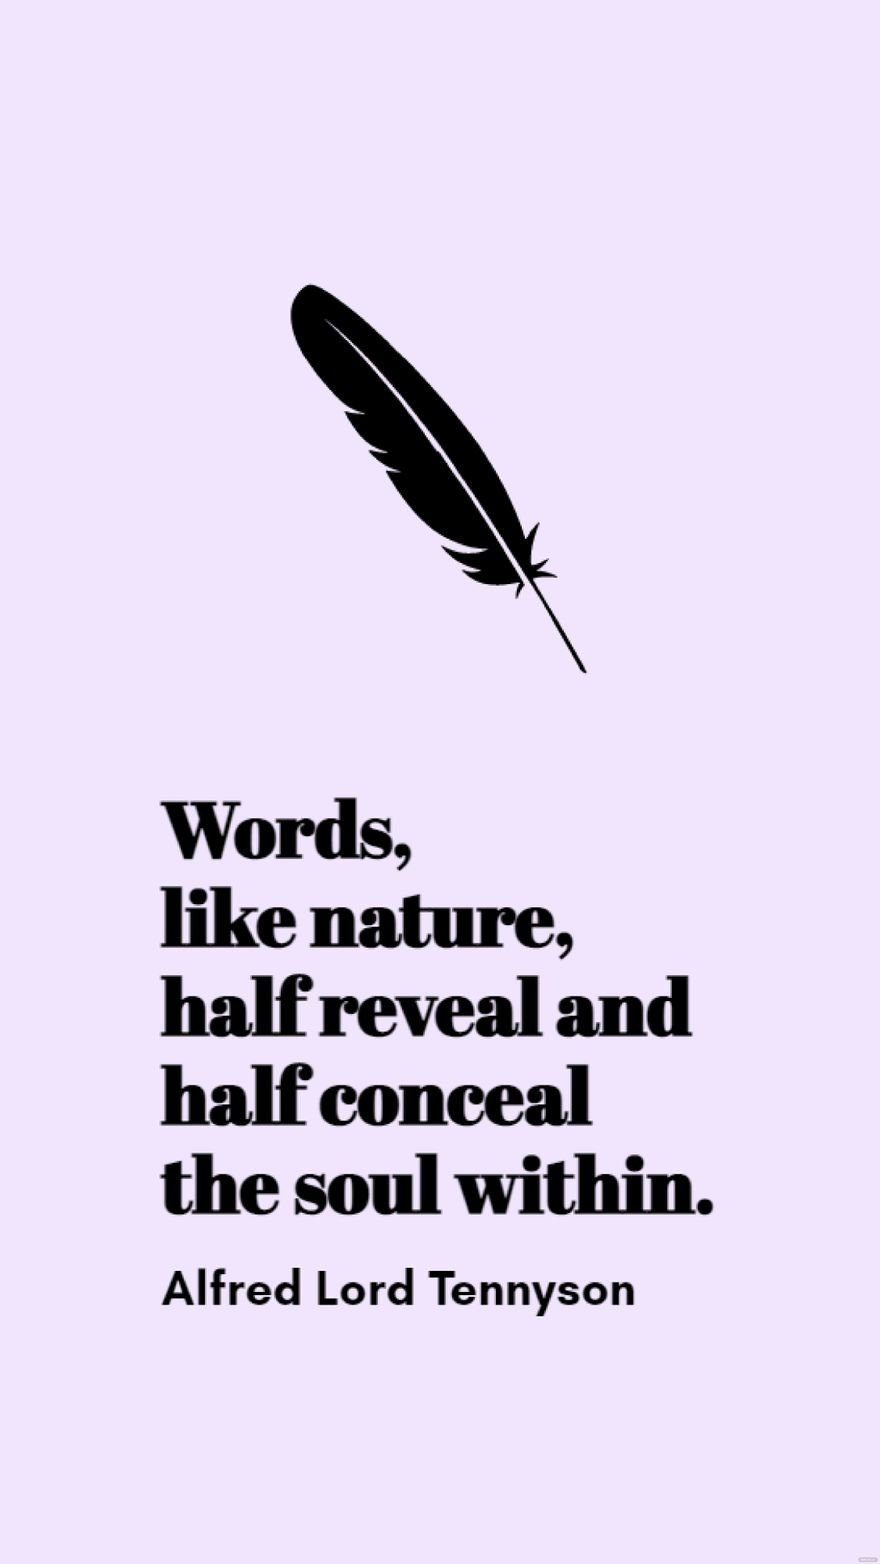 Alfred Lord Tennyson - Words, like nature, half reveal and half conceal the soul within.